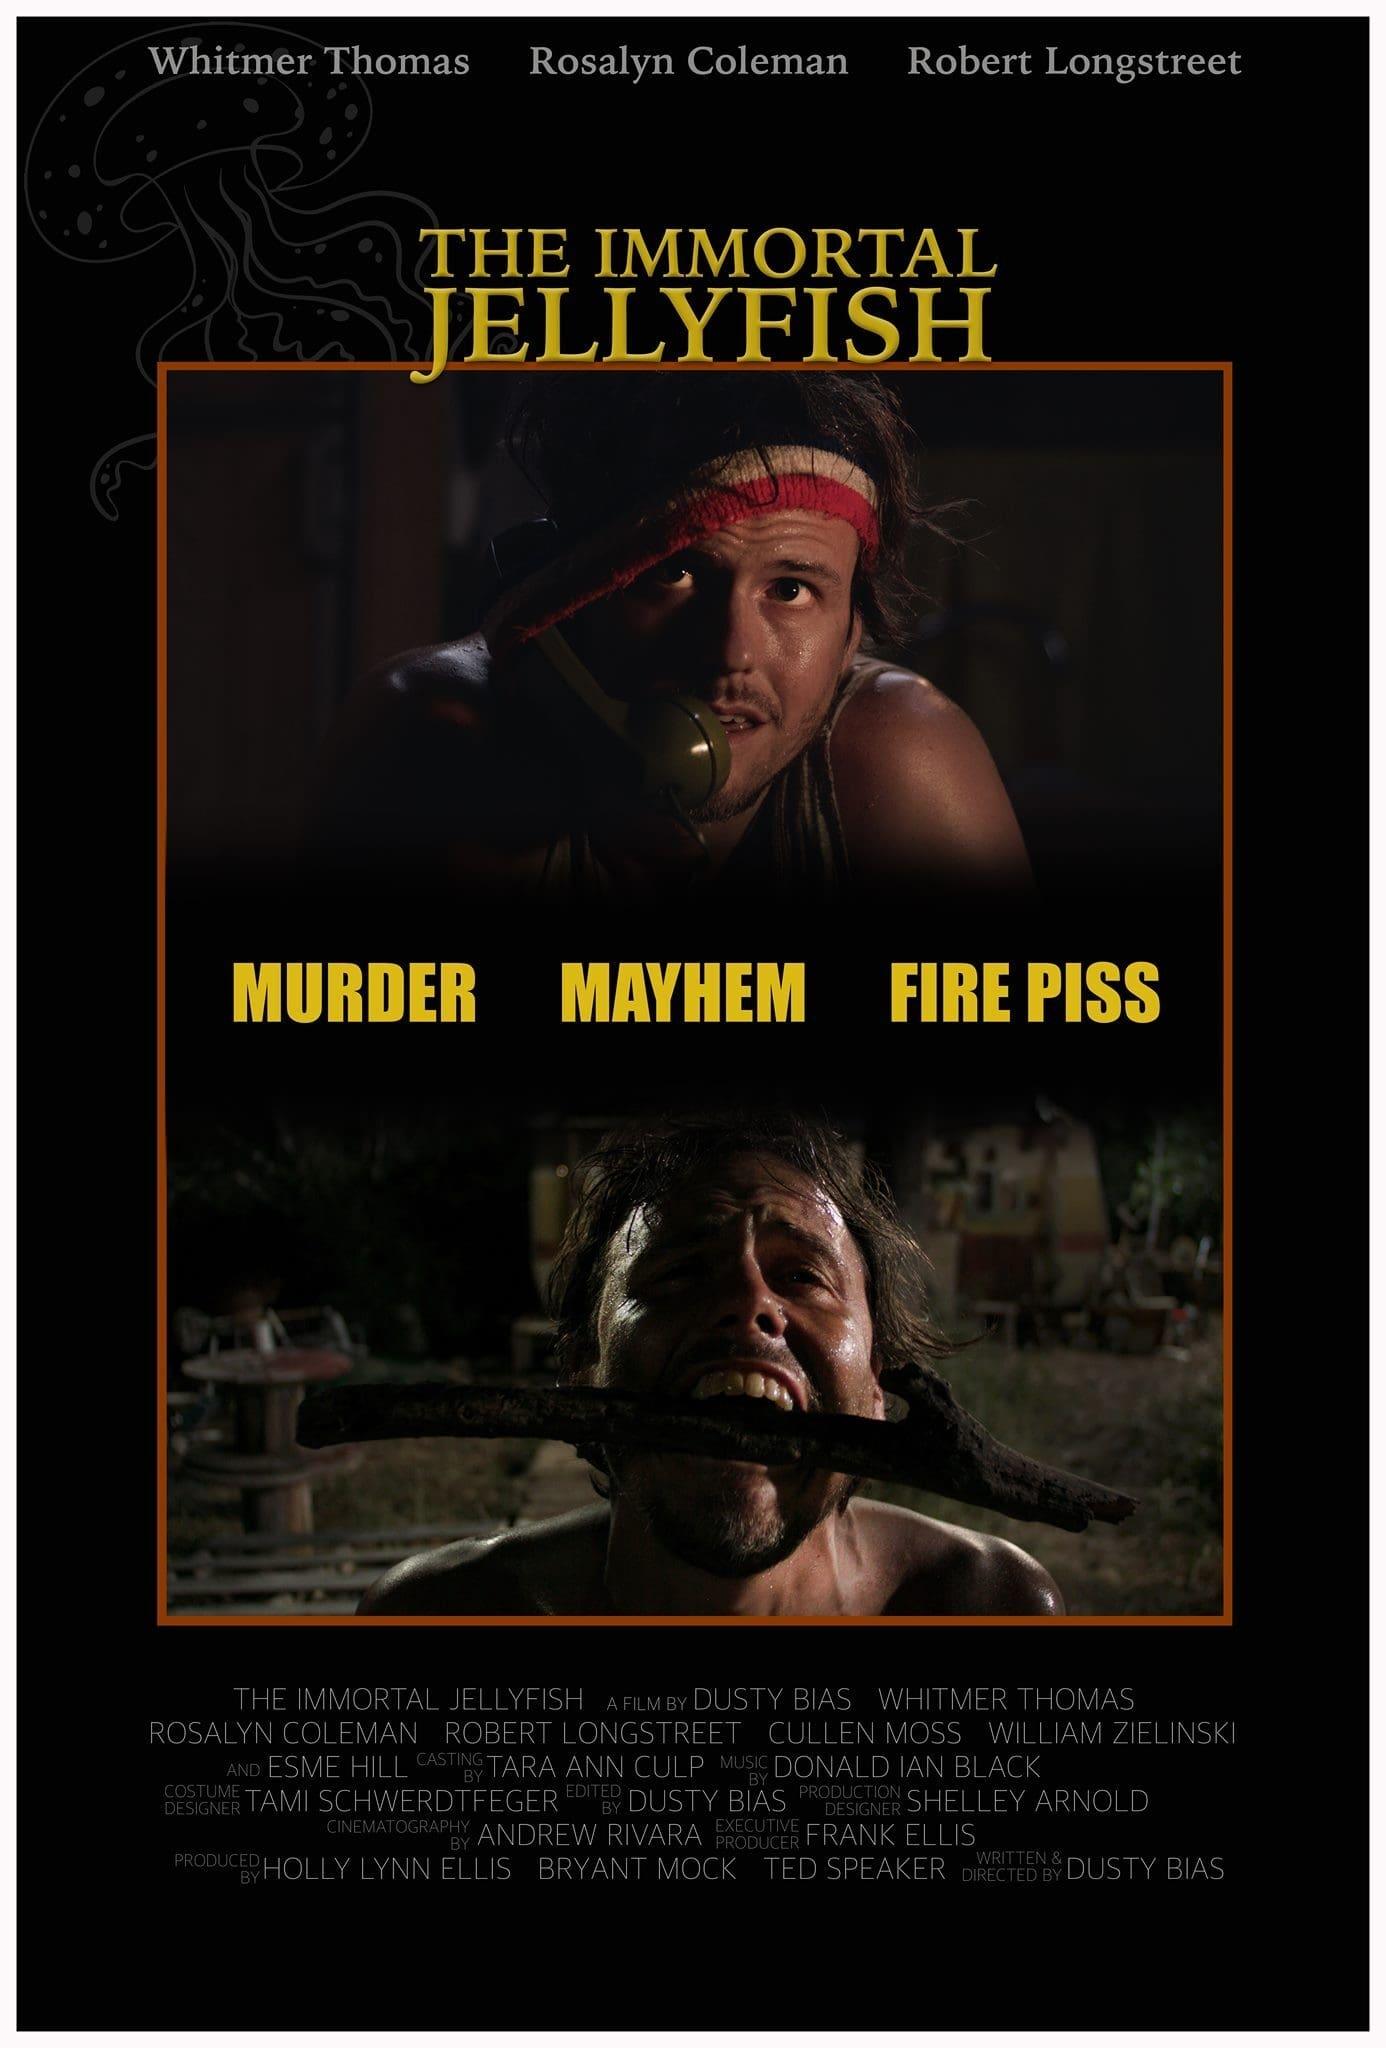 The Immortal Jellyfish poster